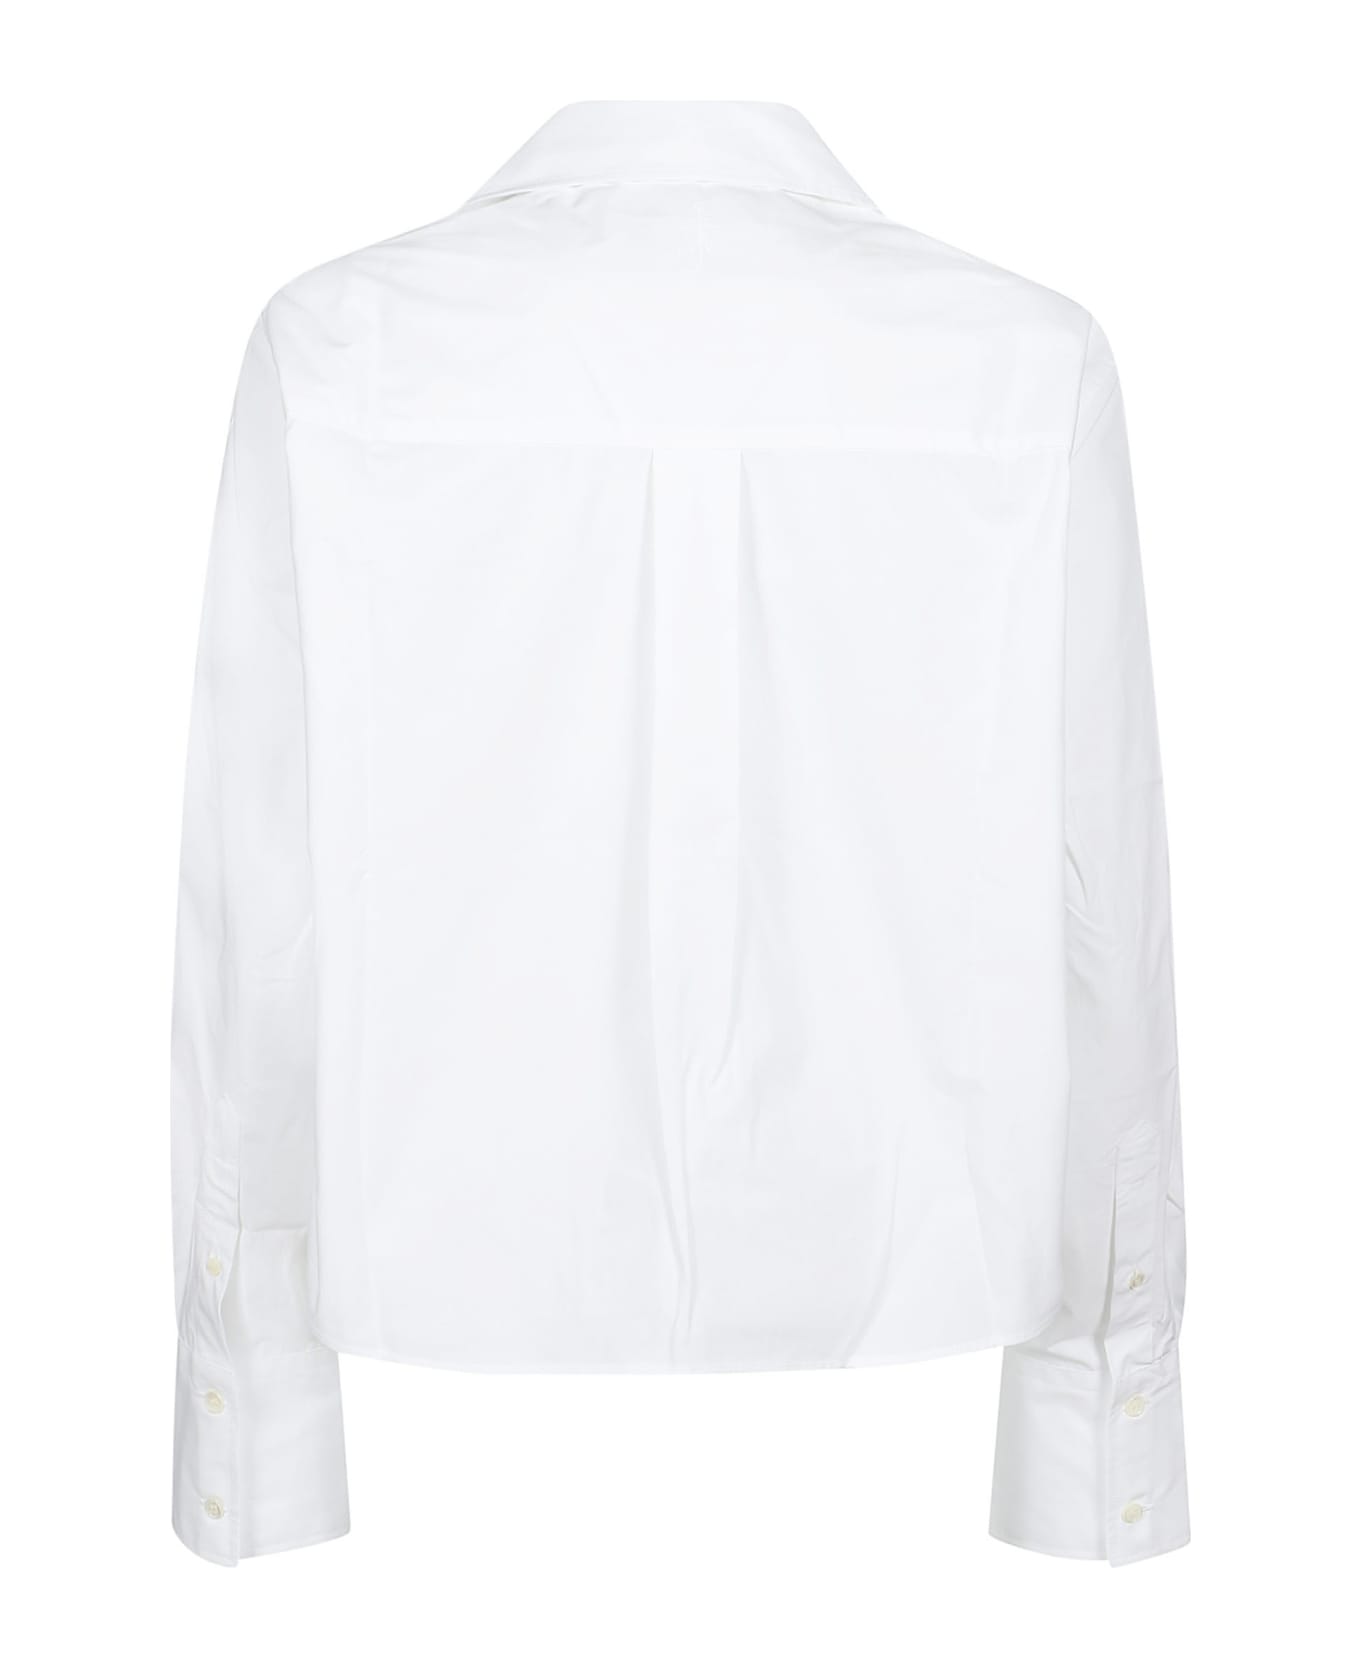 J.W. Anderson Bow Tie Cropped Shirt - White シャツ